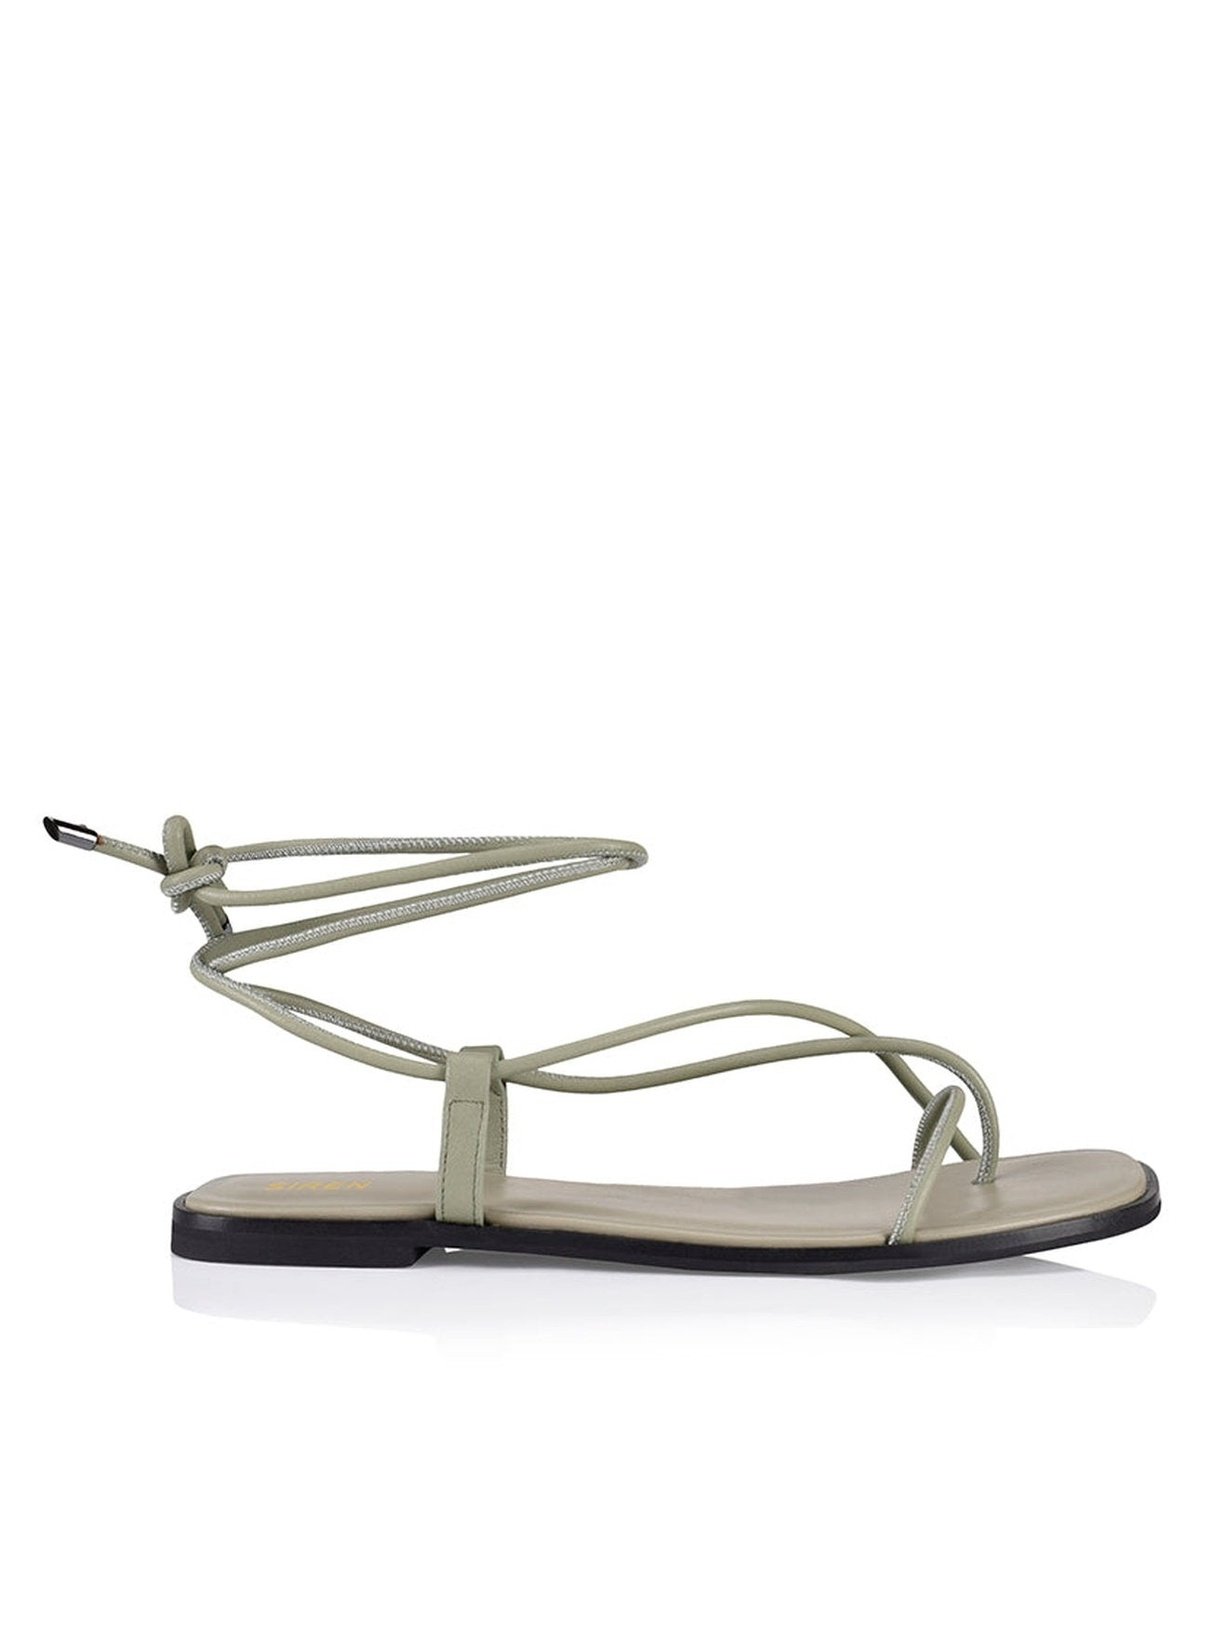 Sava Tie Up Sandals Olive Leather | Siren Shoes